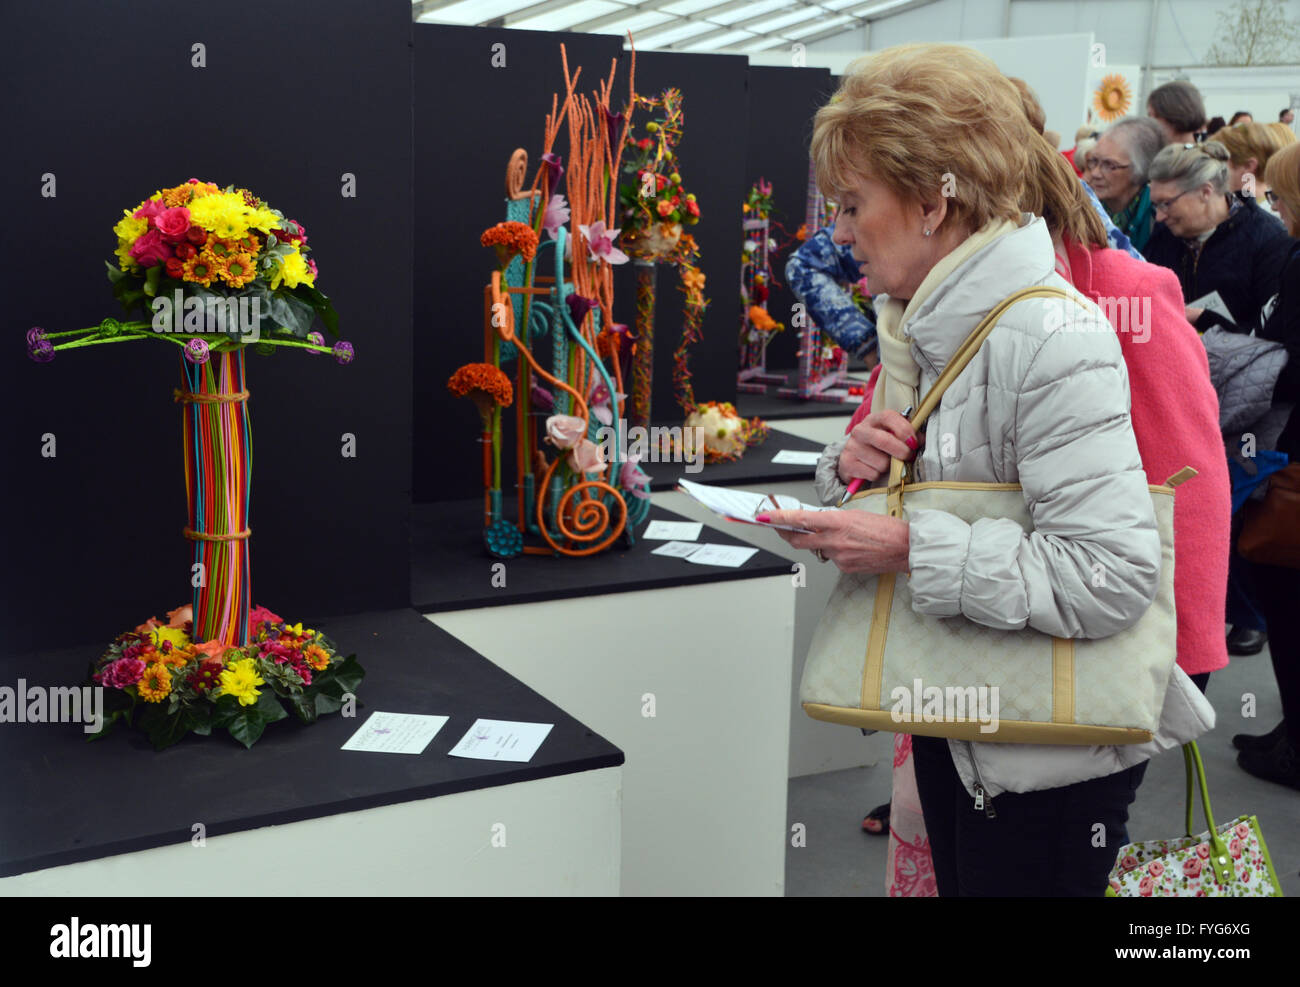 A Woman Looking at a Floral Art Display in the Floral Pavilion at the Harrogate Spring Flower Show. Yorkshire UK. Stock Photo